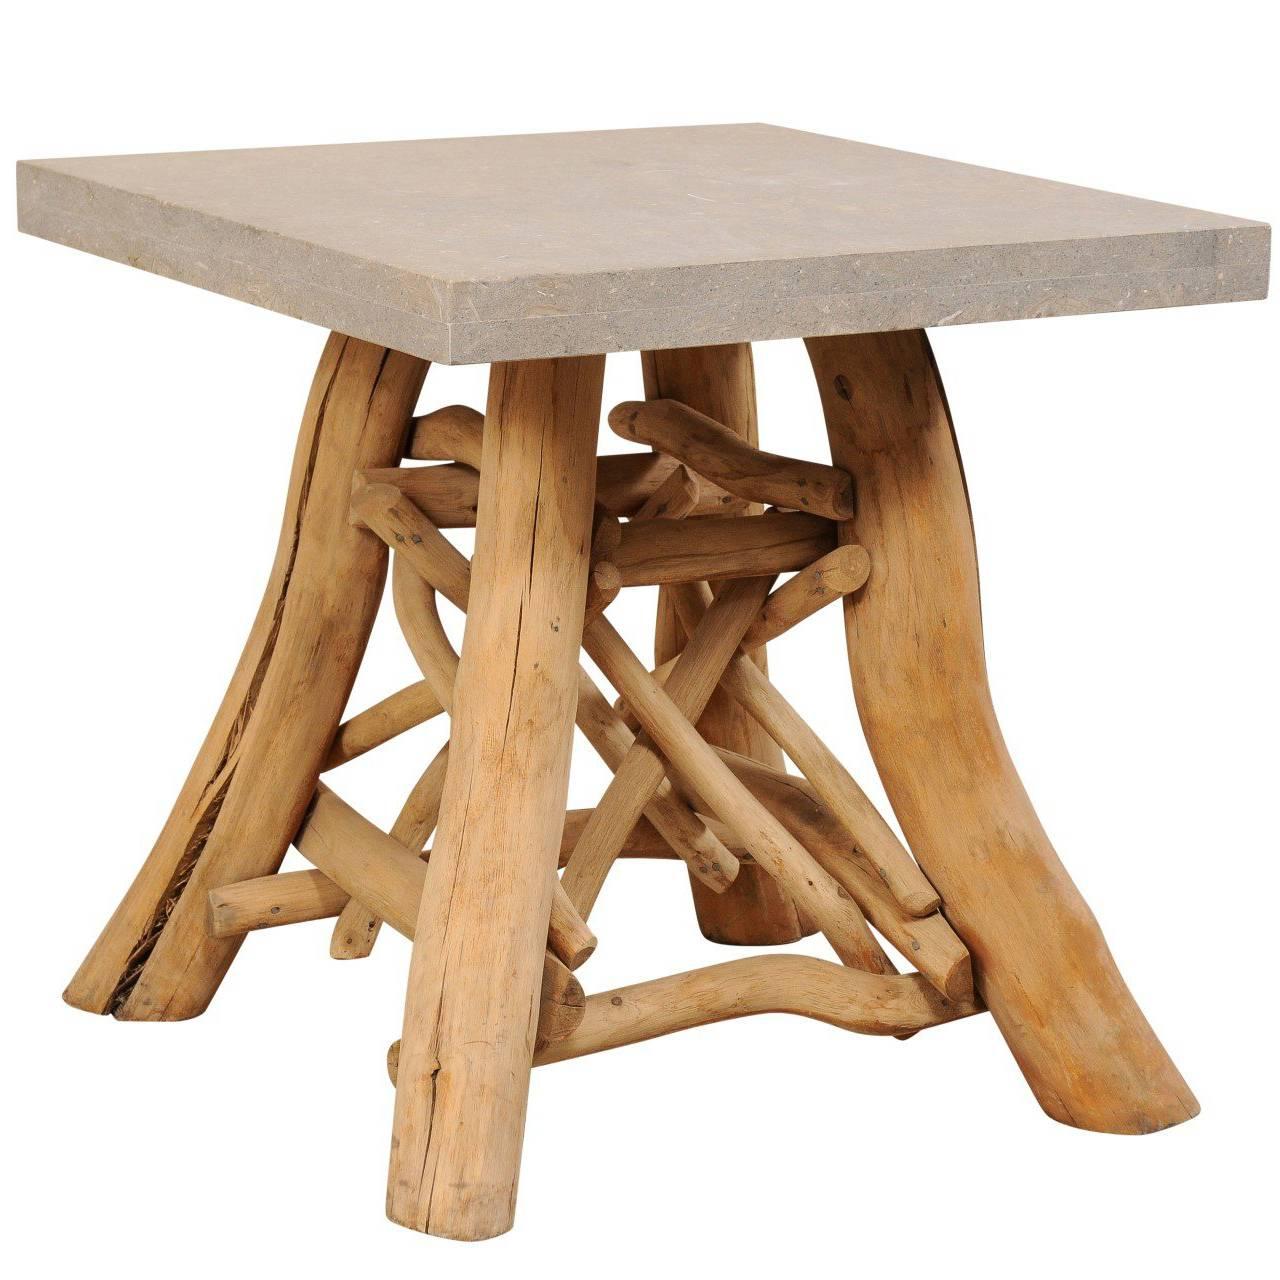 European Rustic Natural Tree Branch Occasional Table with Honed Stone Top